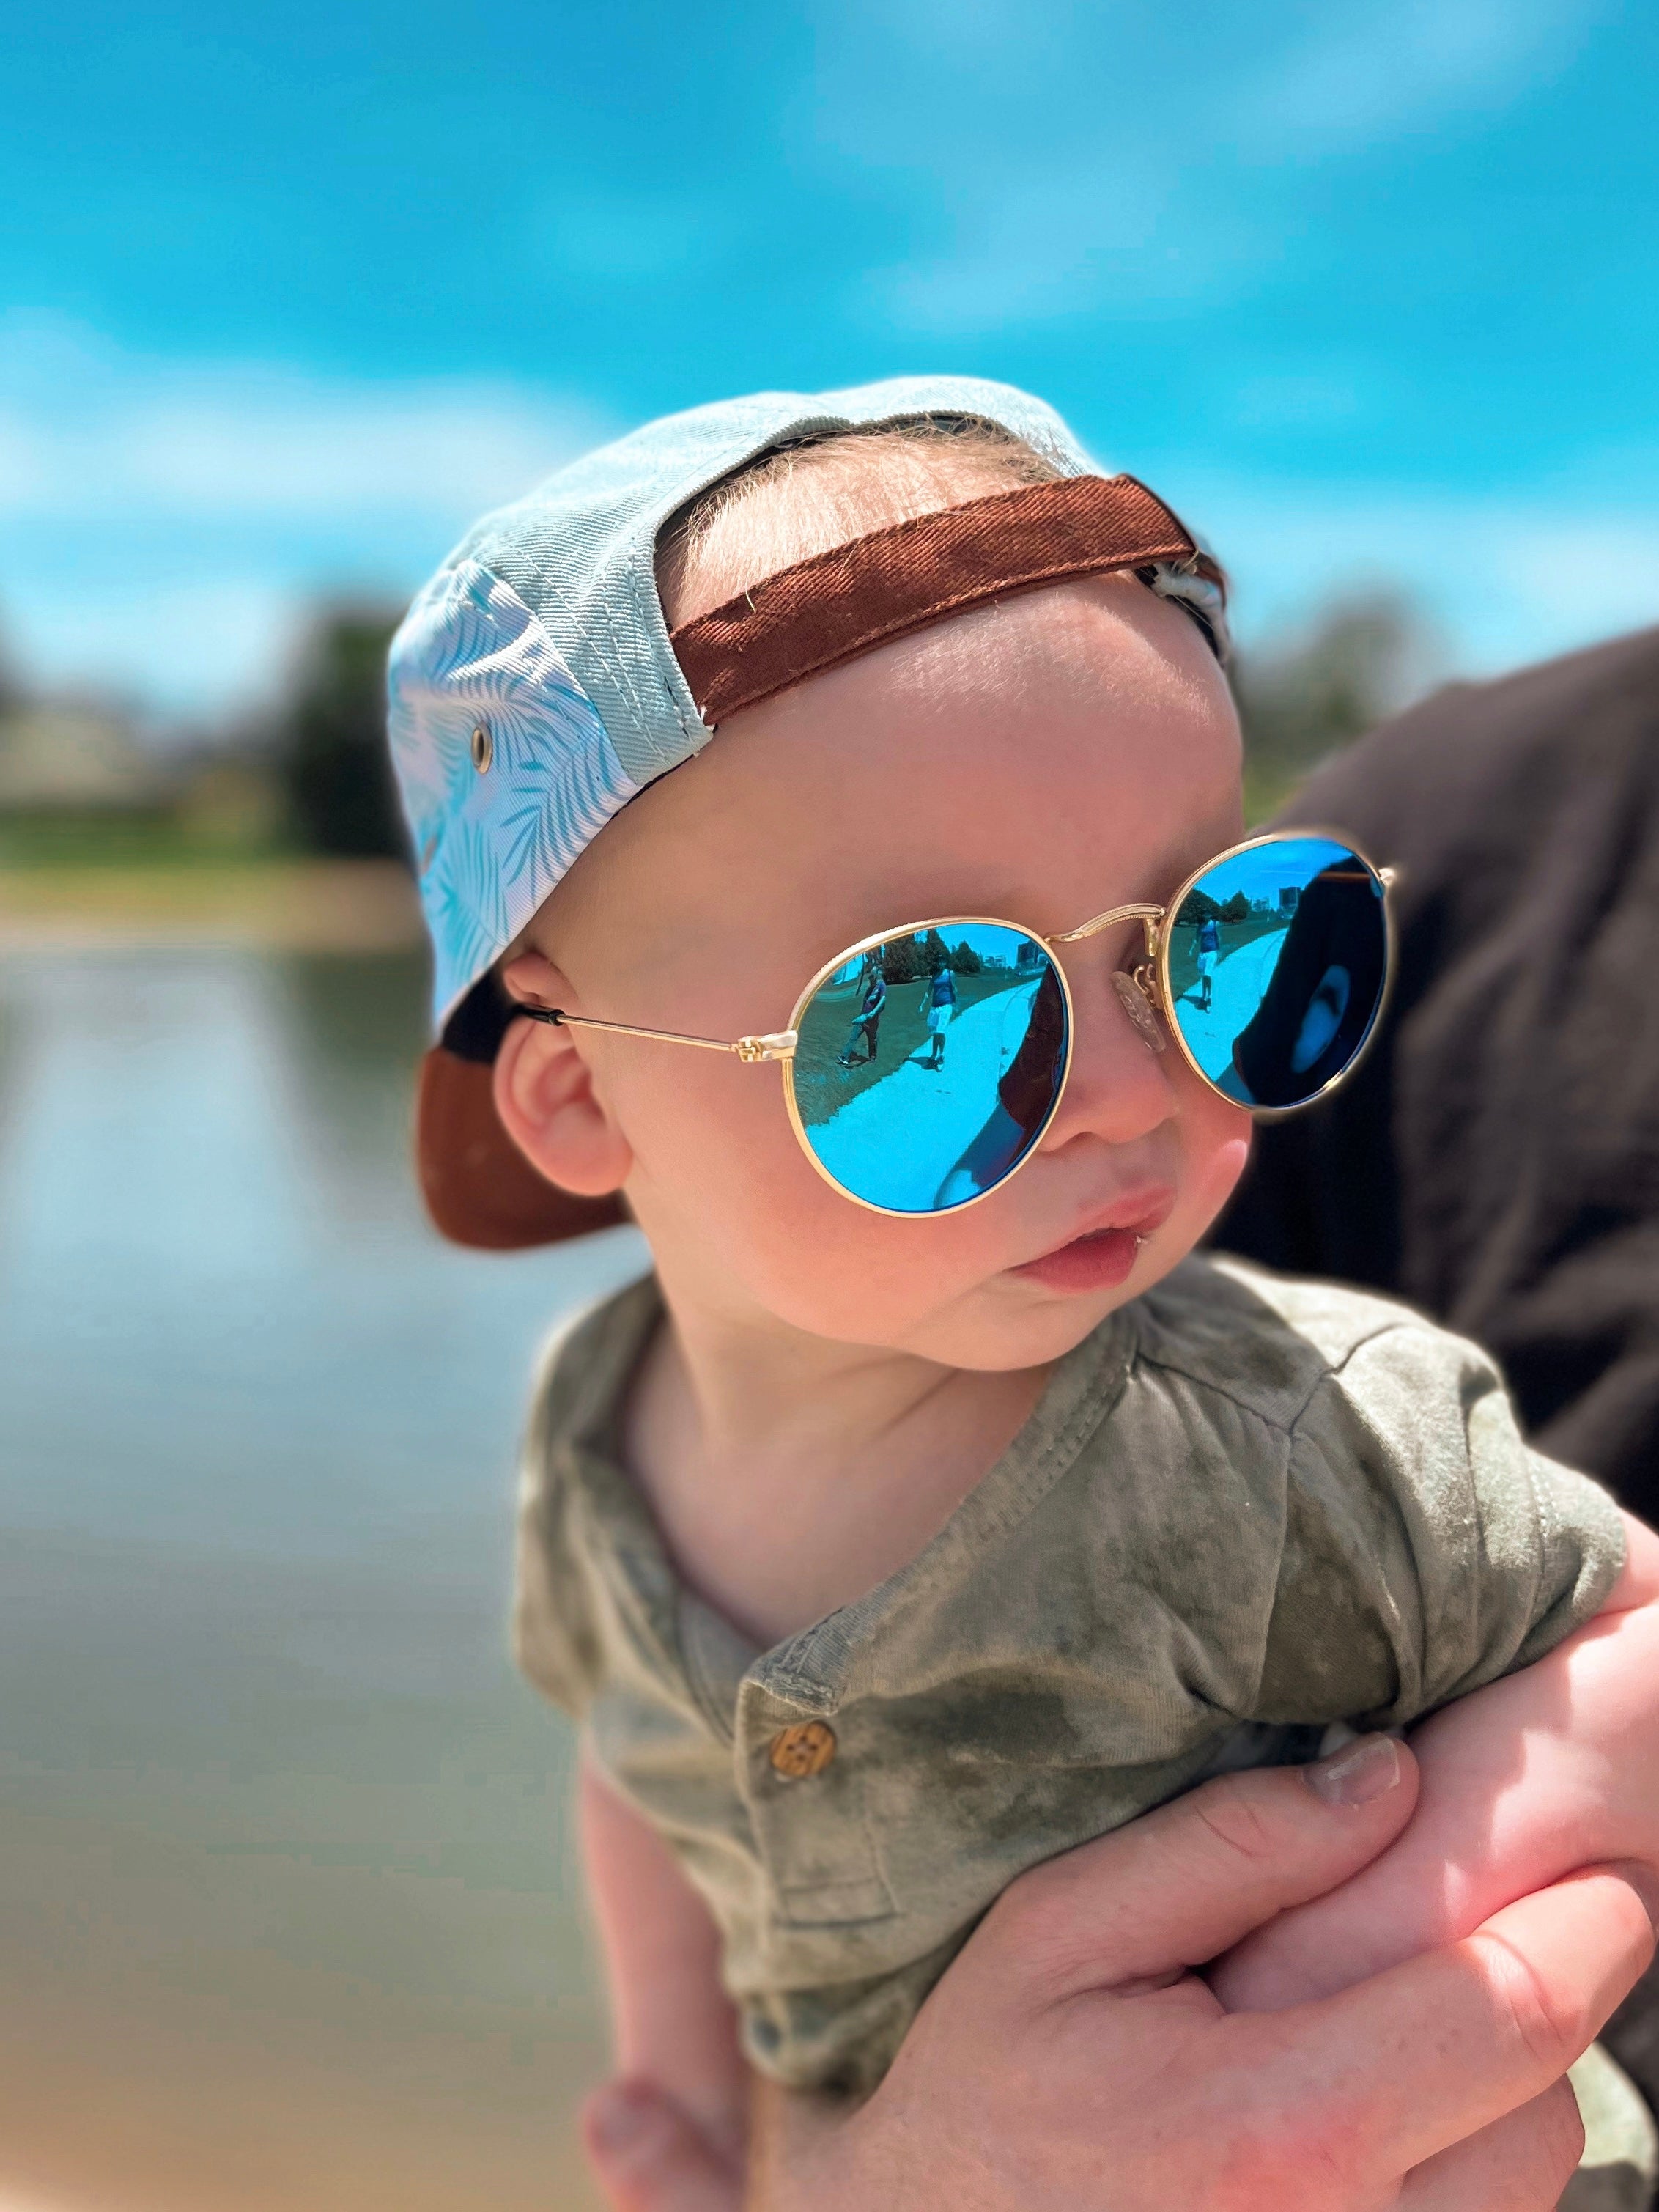 Baby wearing reflective shades in the sunny summer by a lake protecting eyes in a blue snapback 5 panel hat